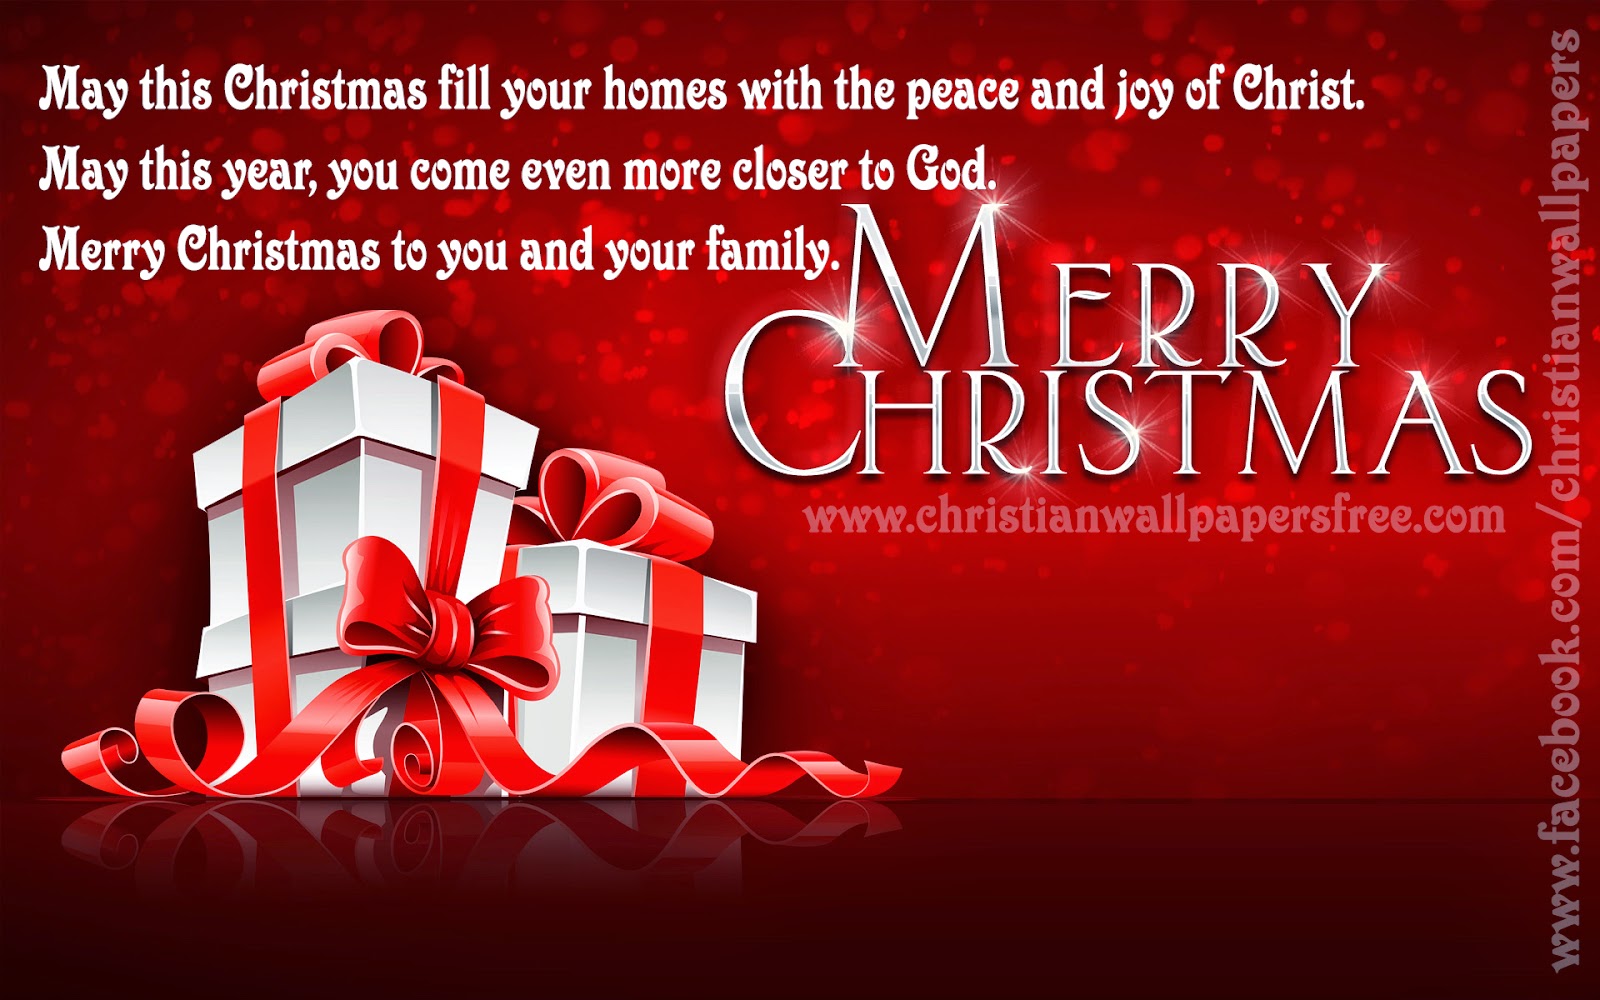 Christmas Greetings With Bible Verse - HD Wallpaper 